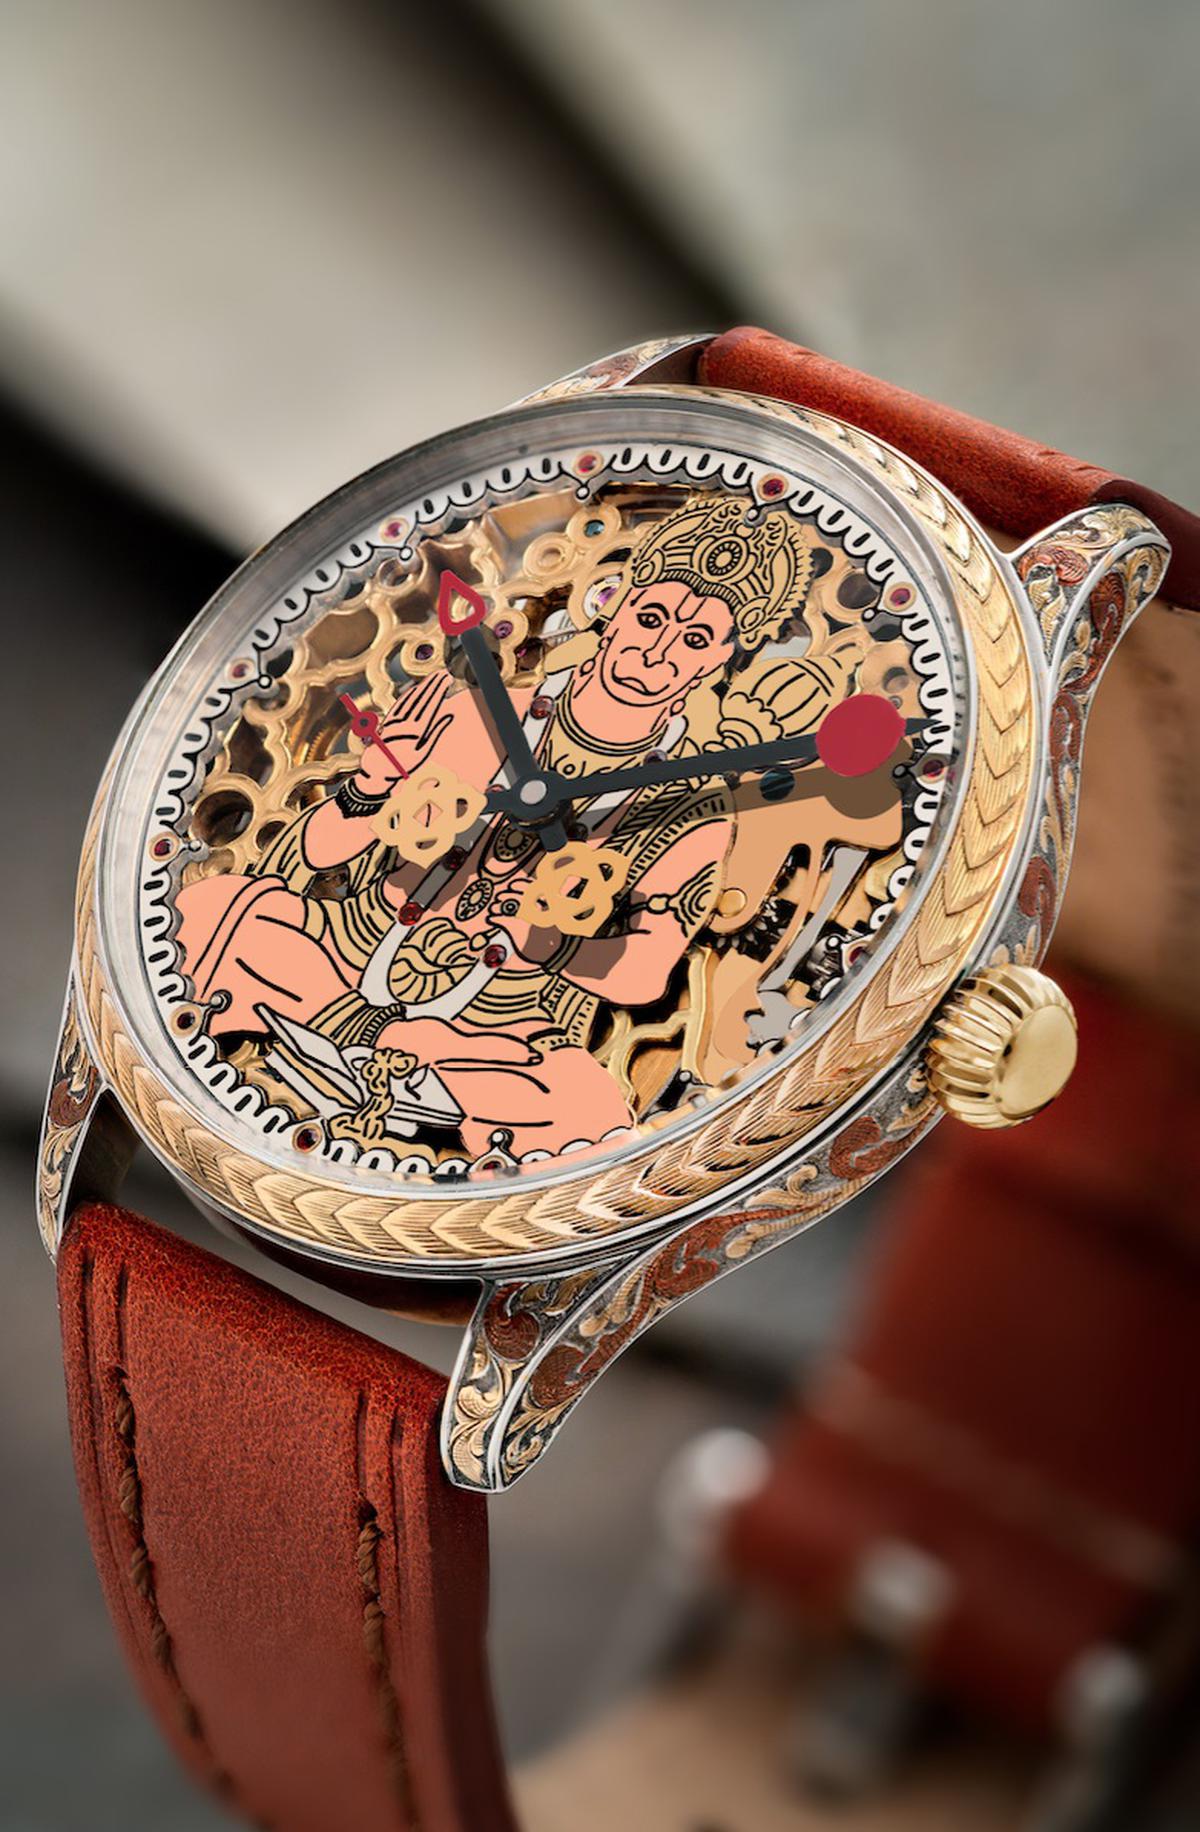 A time for art and history with Jaipur Watch Company